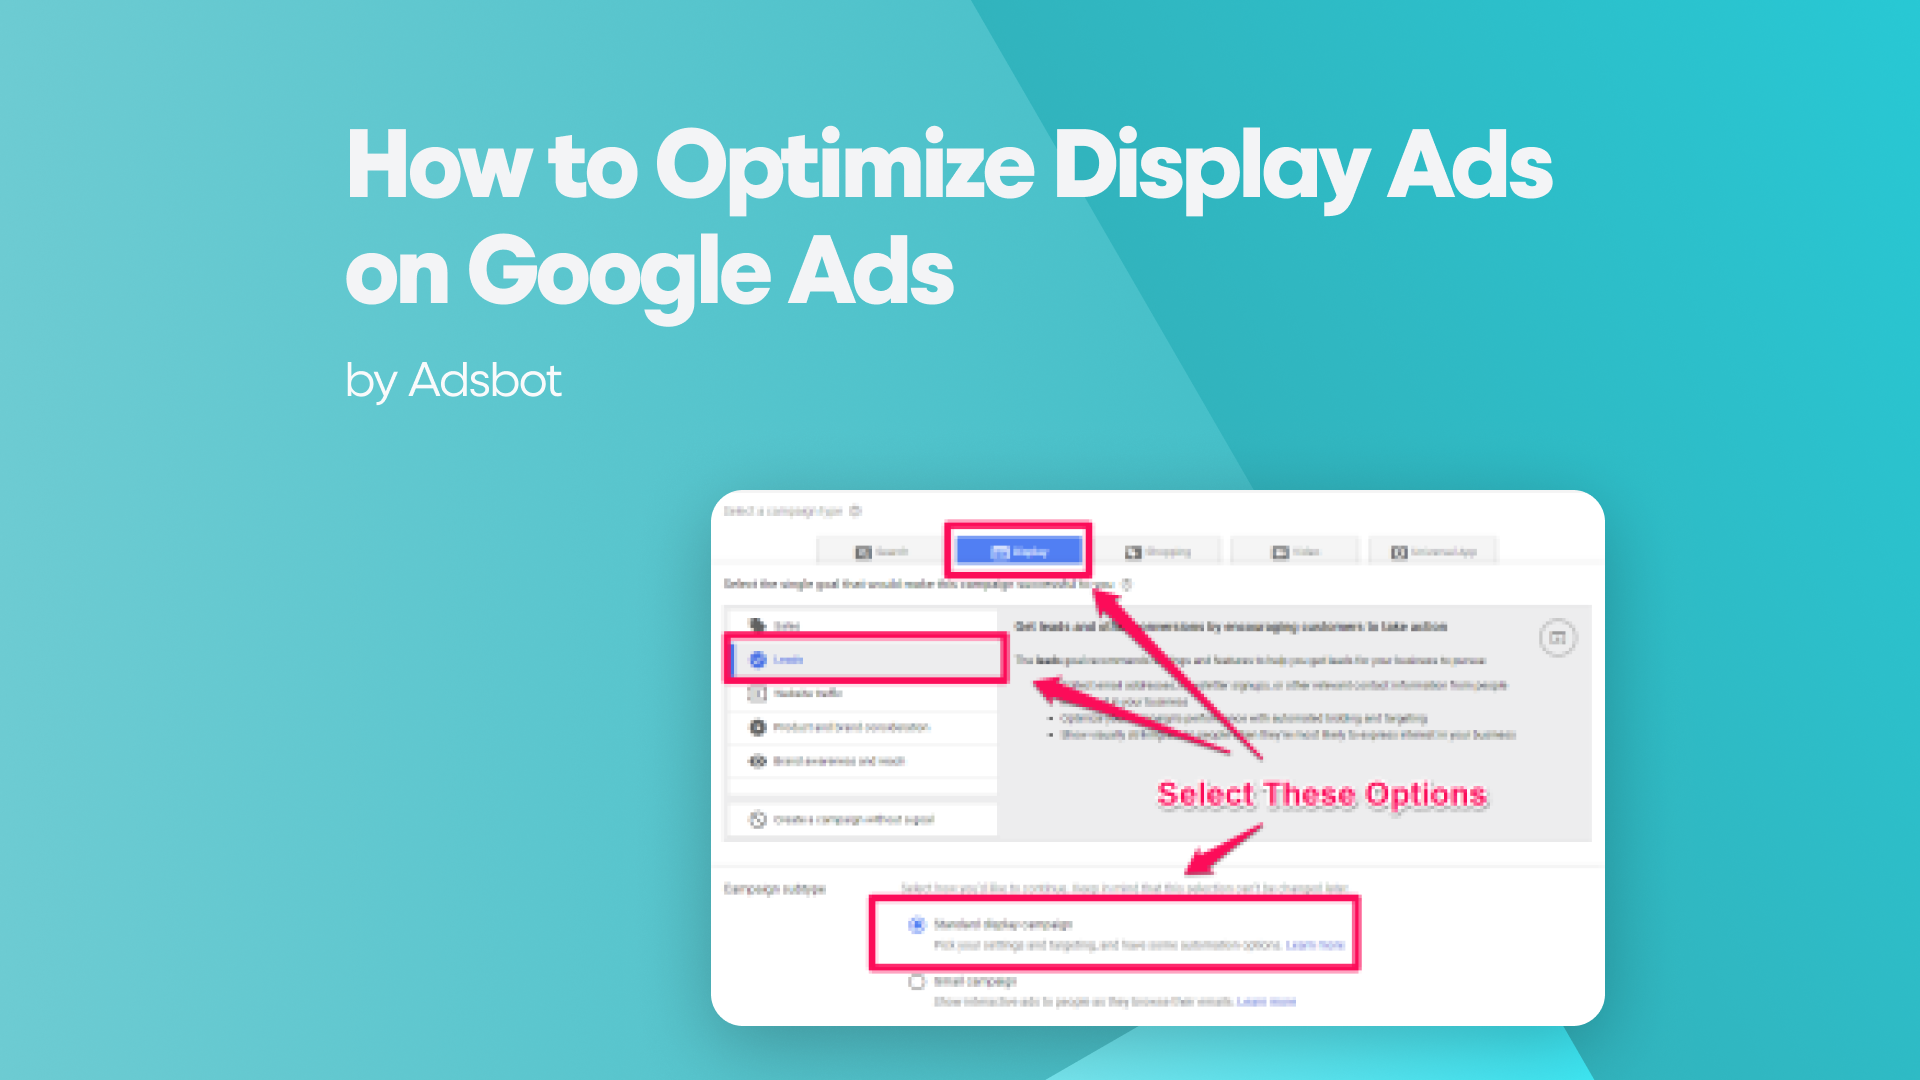 How to Optimize Display Ads on Google Ads